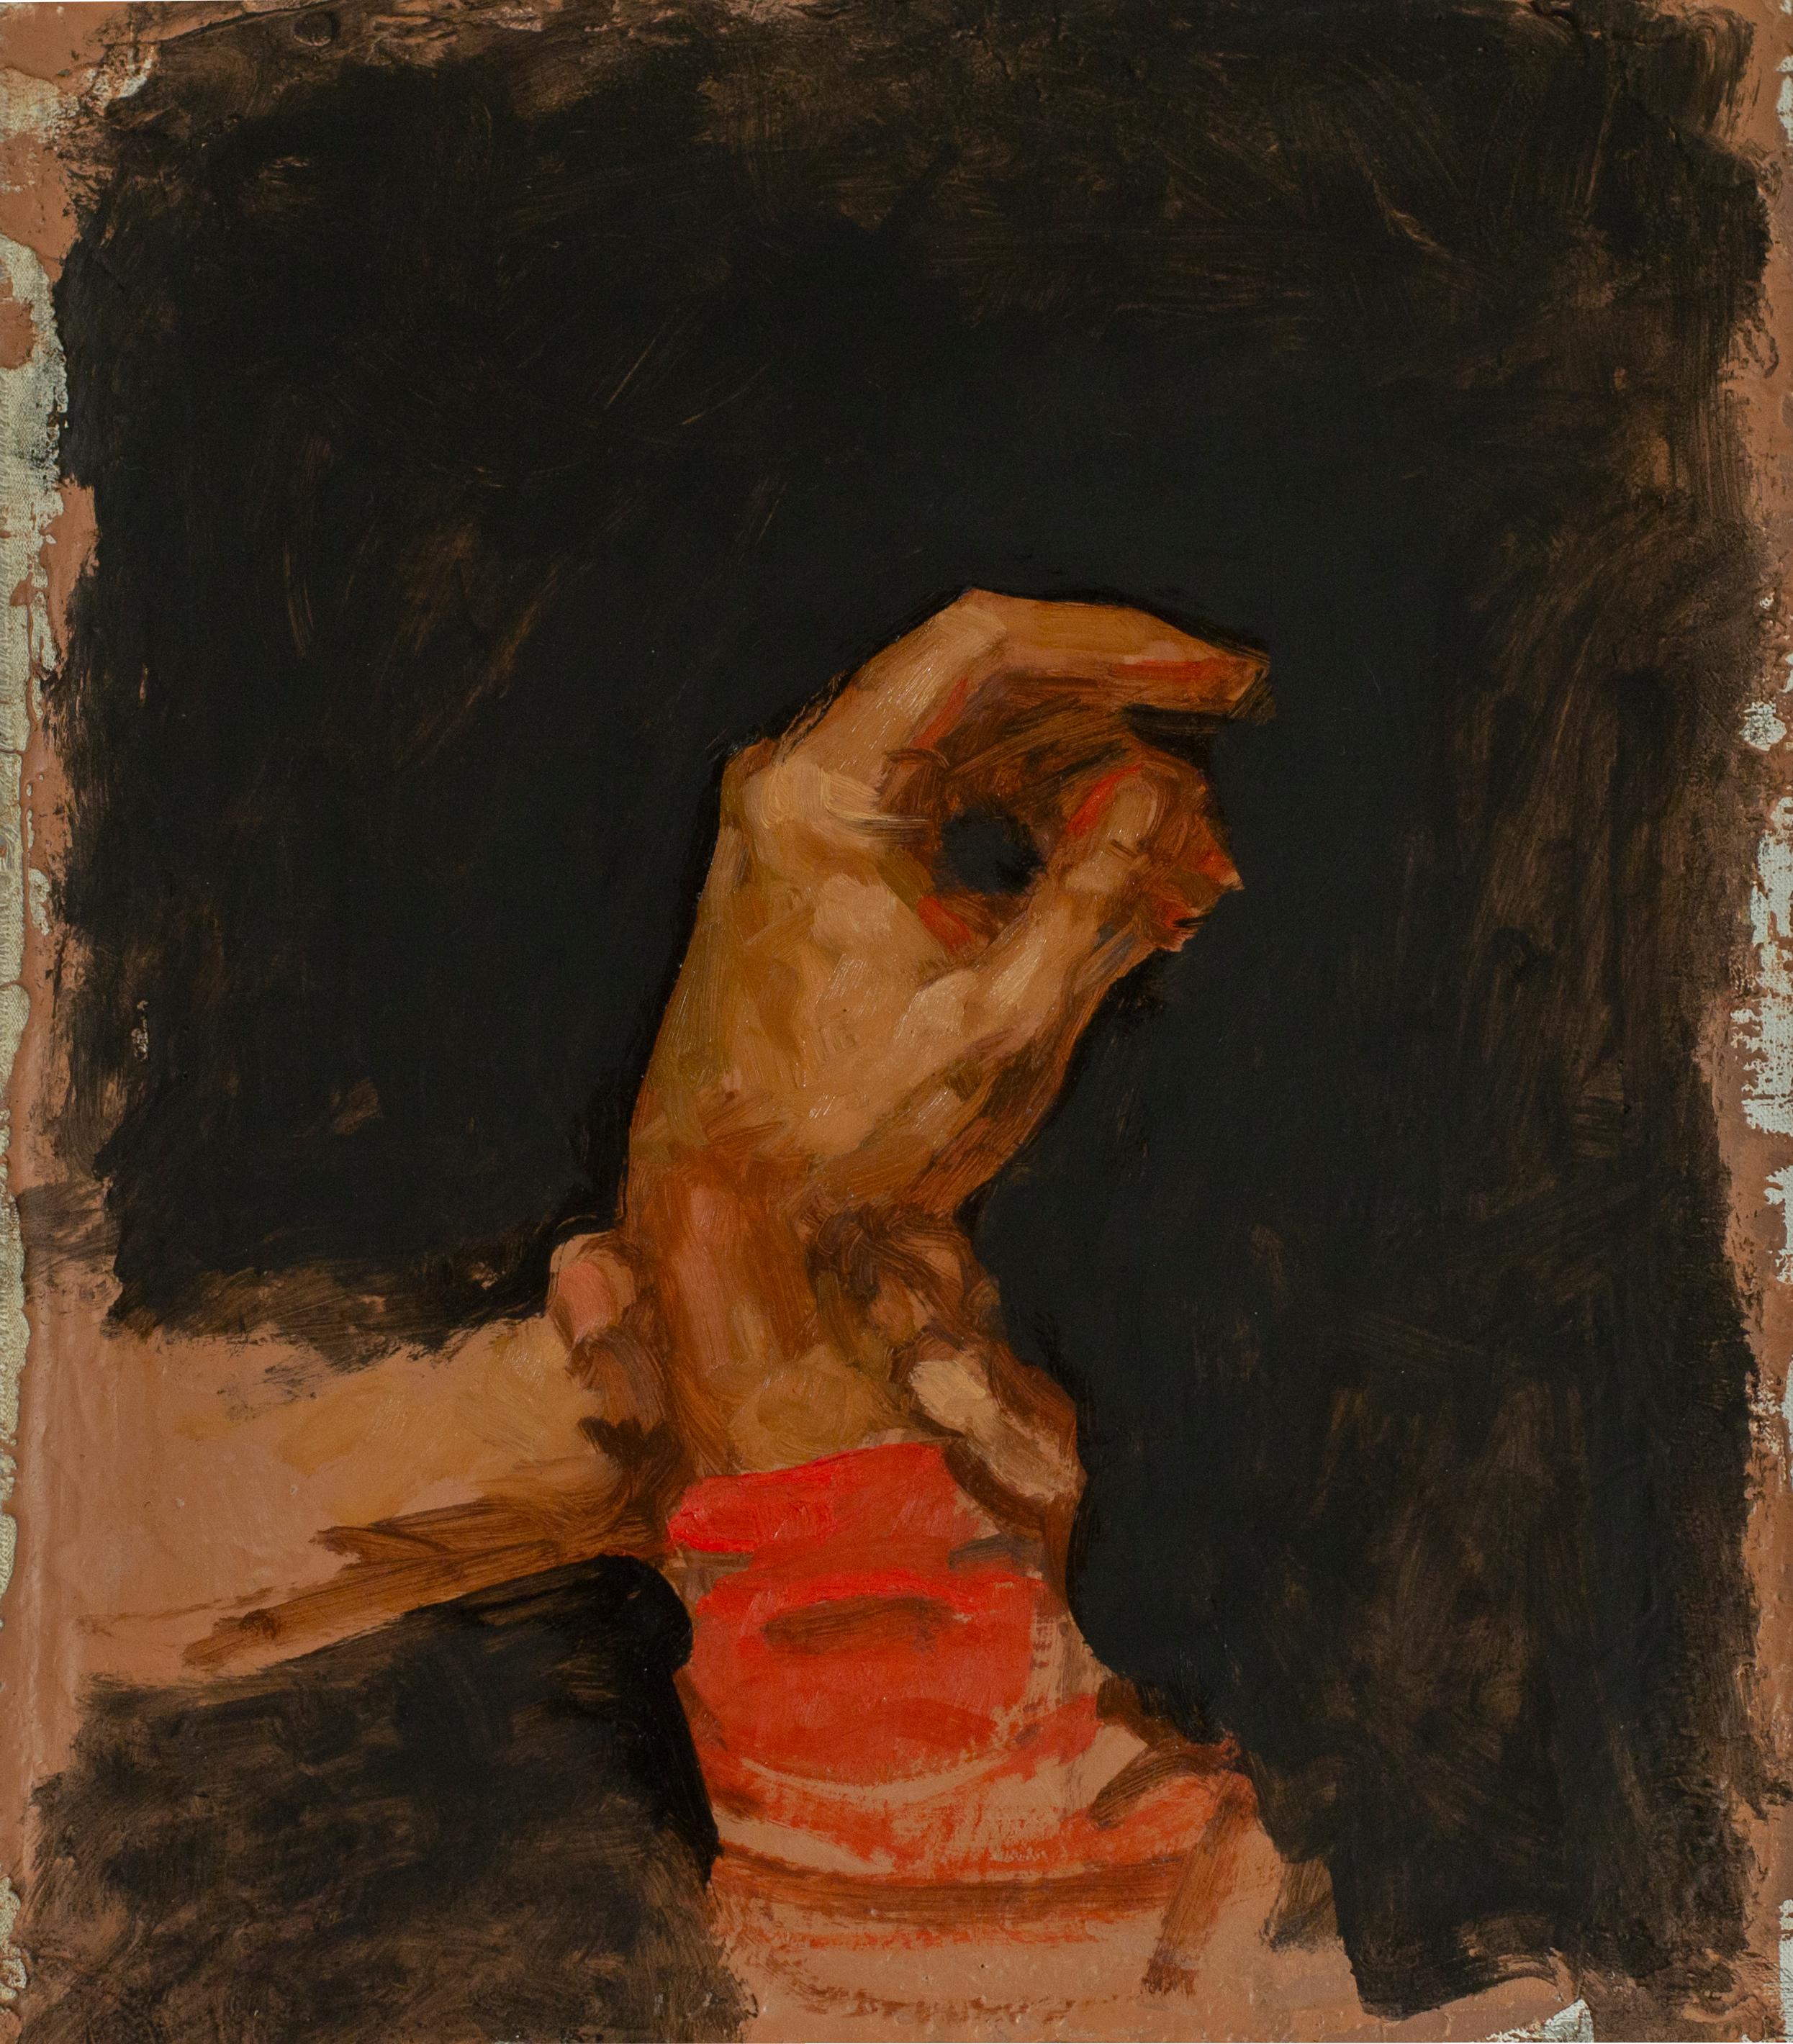 William Blake (b. 1991)  Portrait Painting - Sketch for Finding a Pulse, Hand of an American Civil War Soldier, Oil on Linen